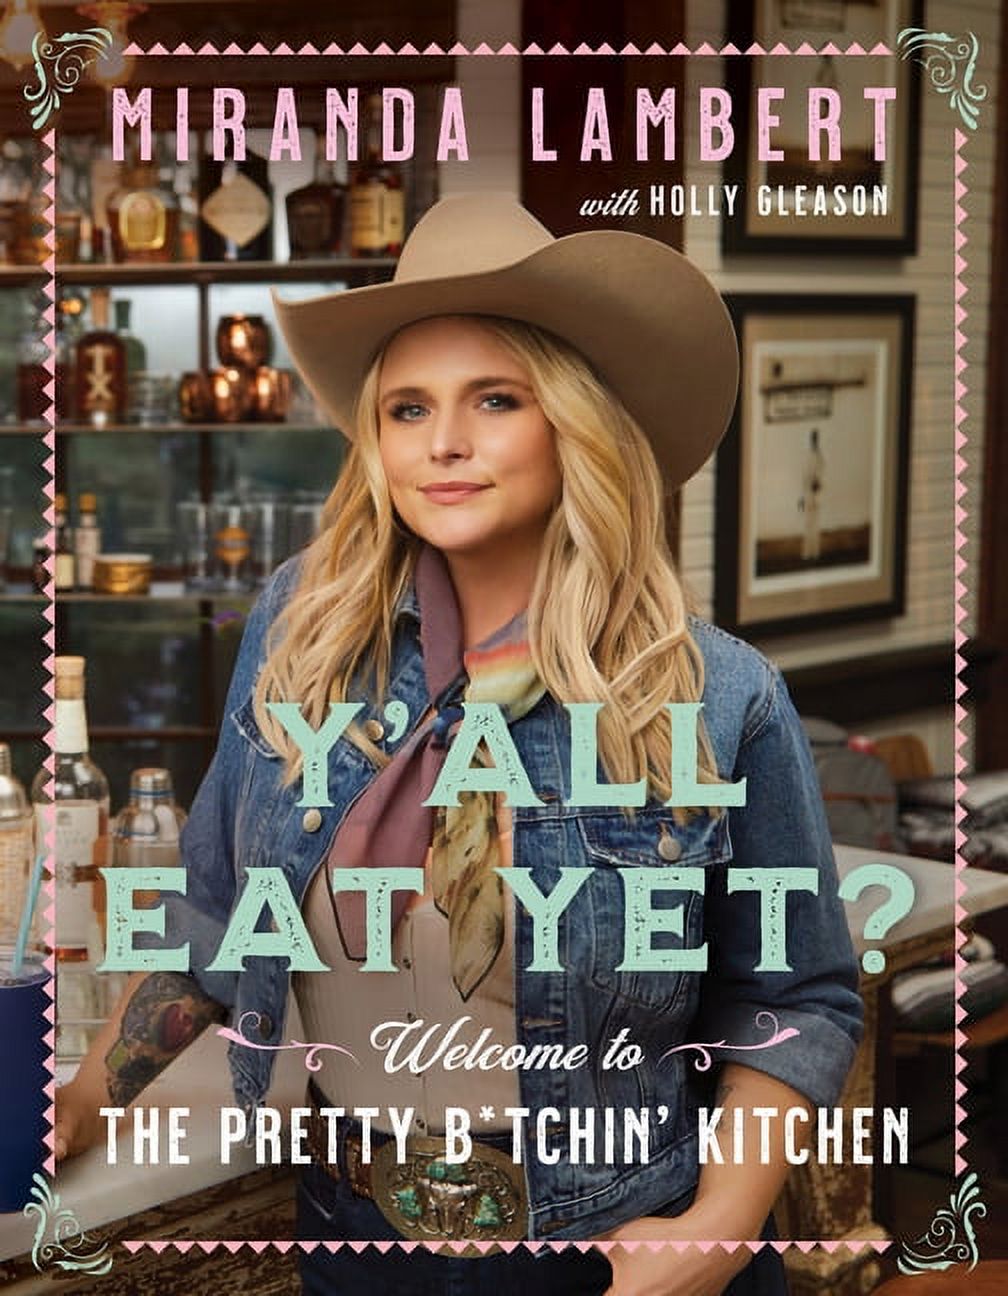 Y'All Eat Yet?: Welcome to the Pretty B*tchin' Kitchen (Hardcover) - image 1 of 2